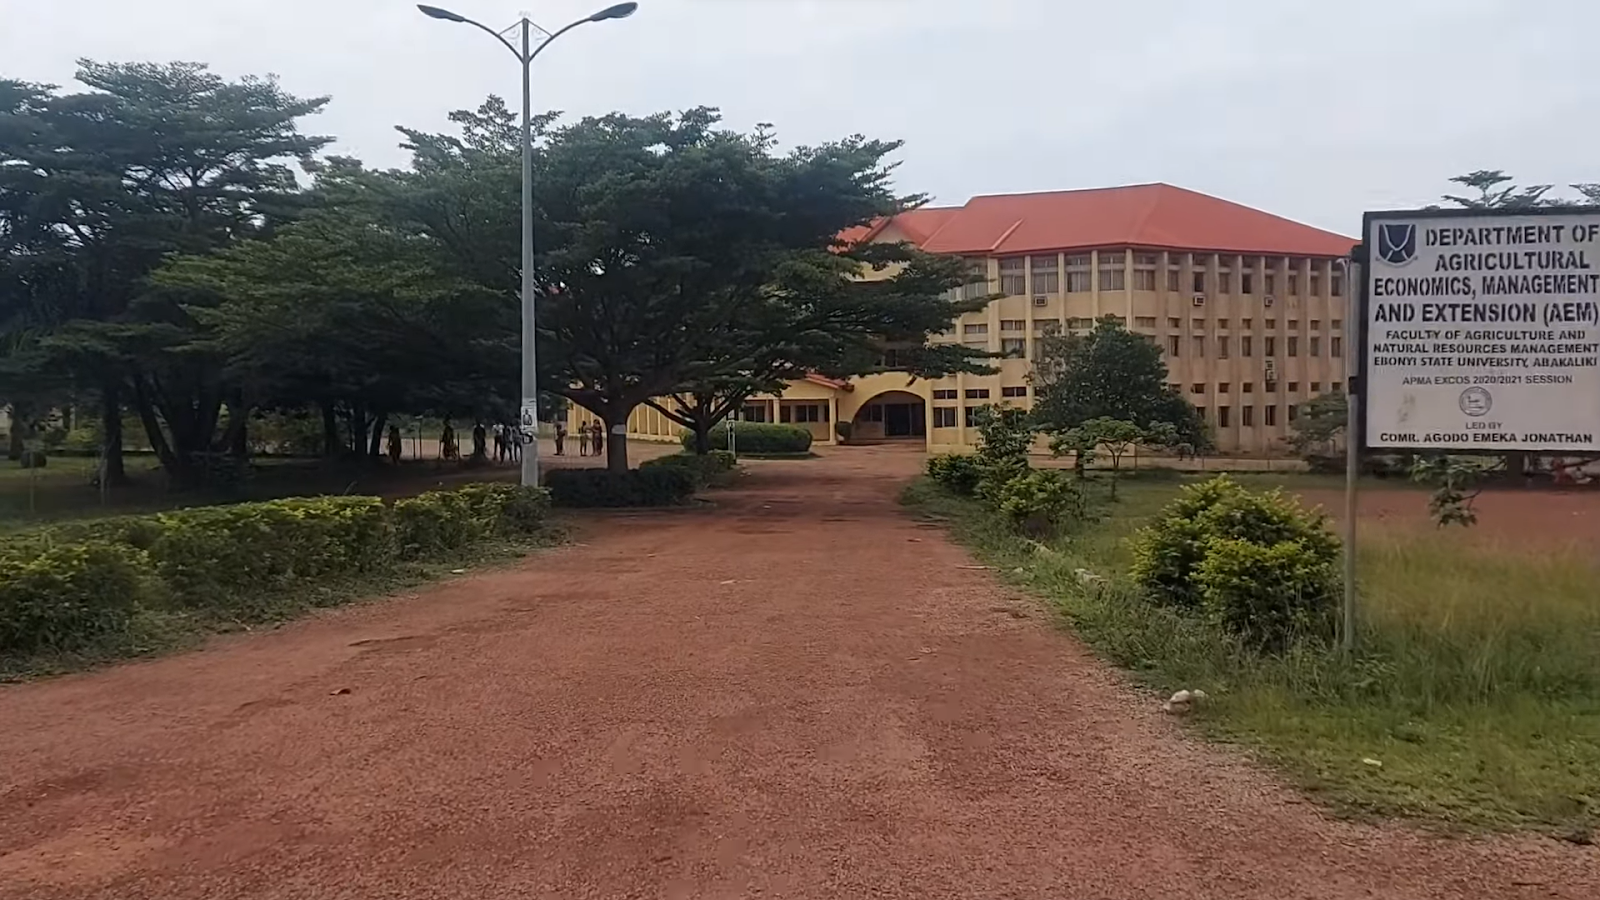 A serene view of a university's department building and its surroundings